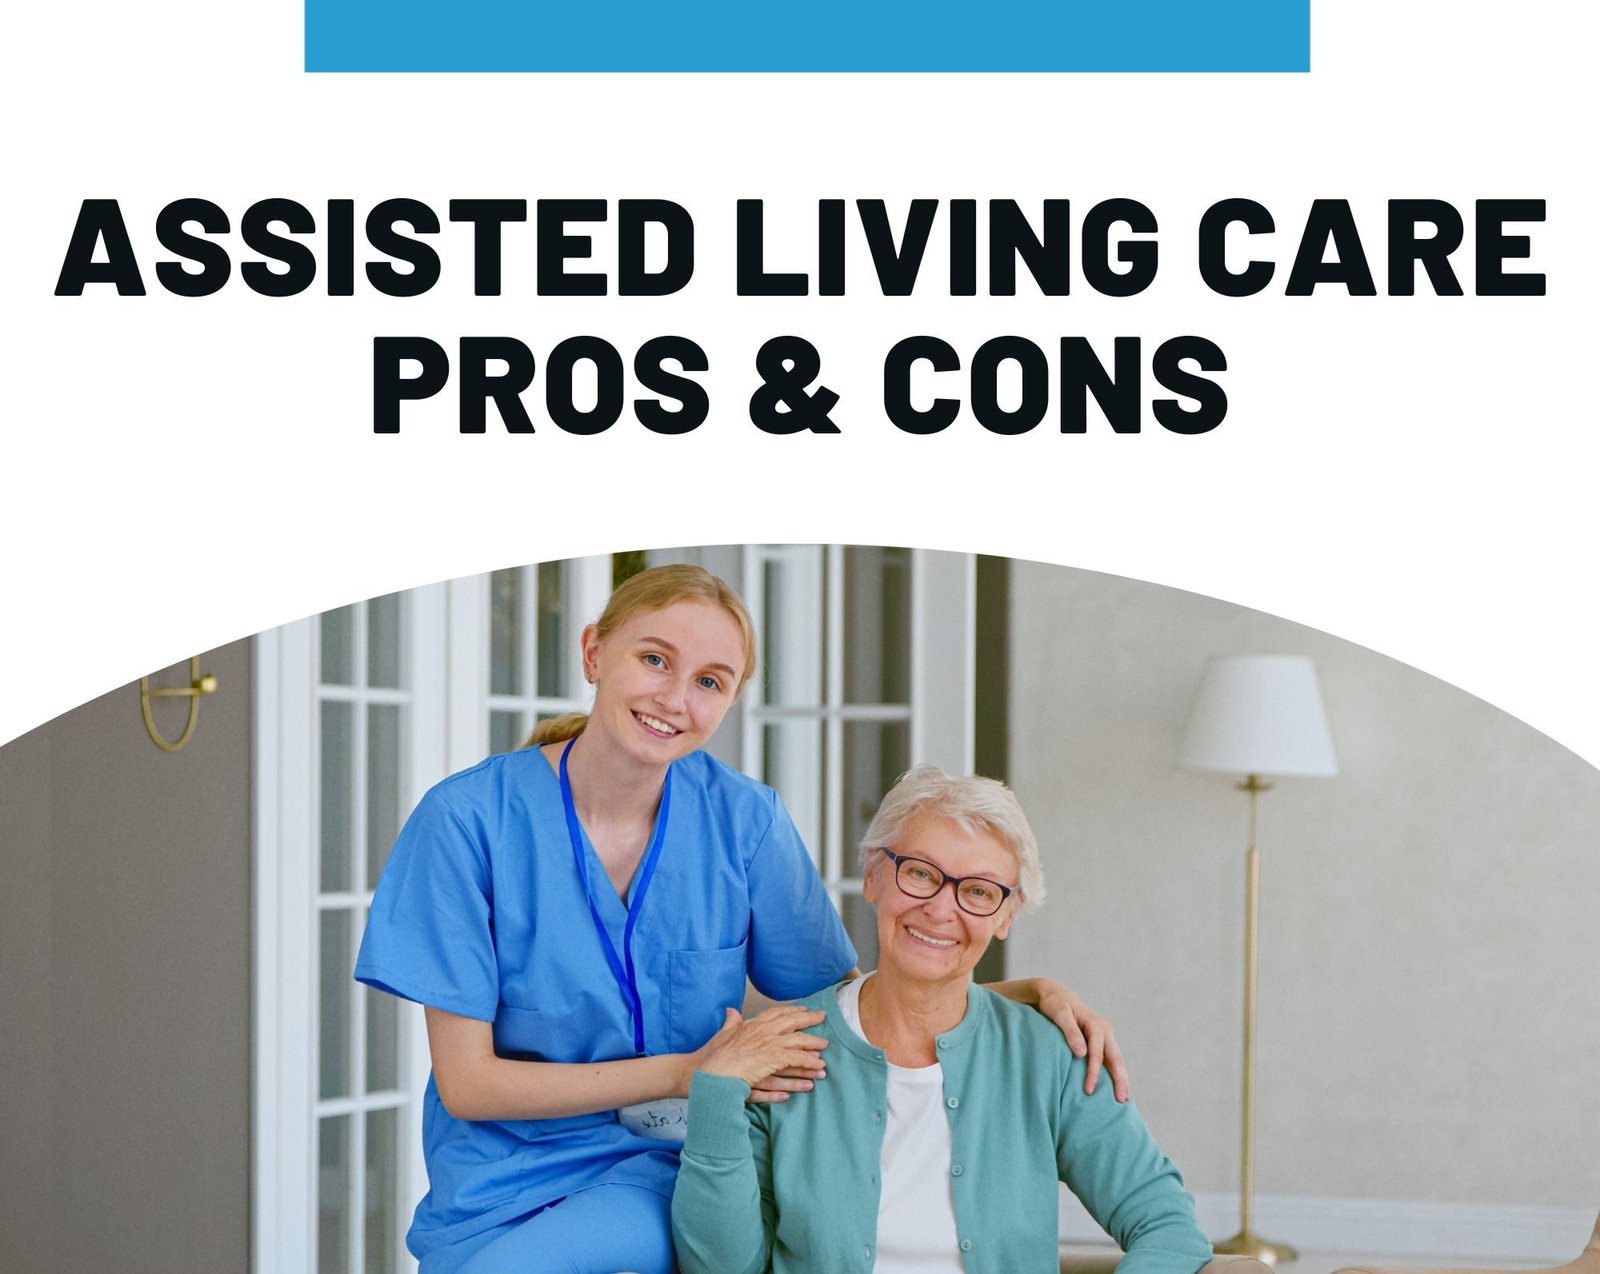 What Are The Pros & Cons of Assisted Living?